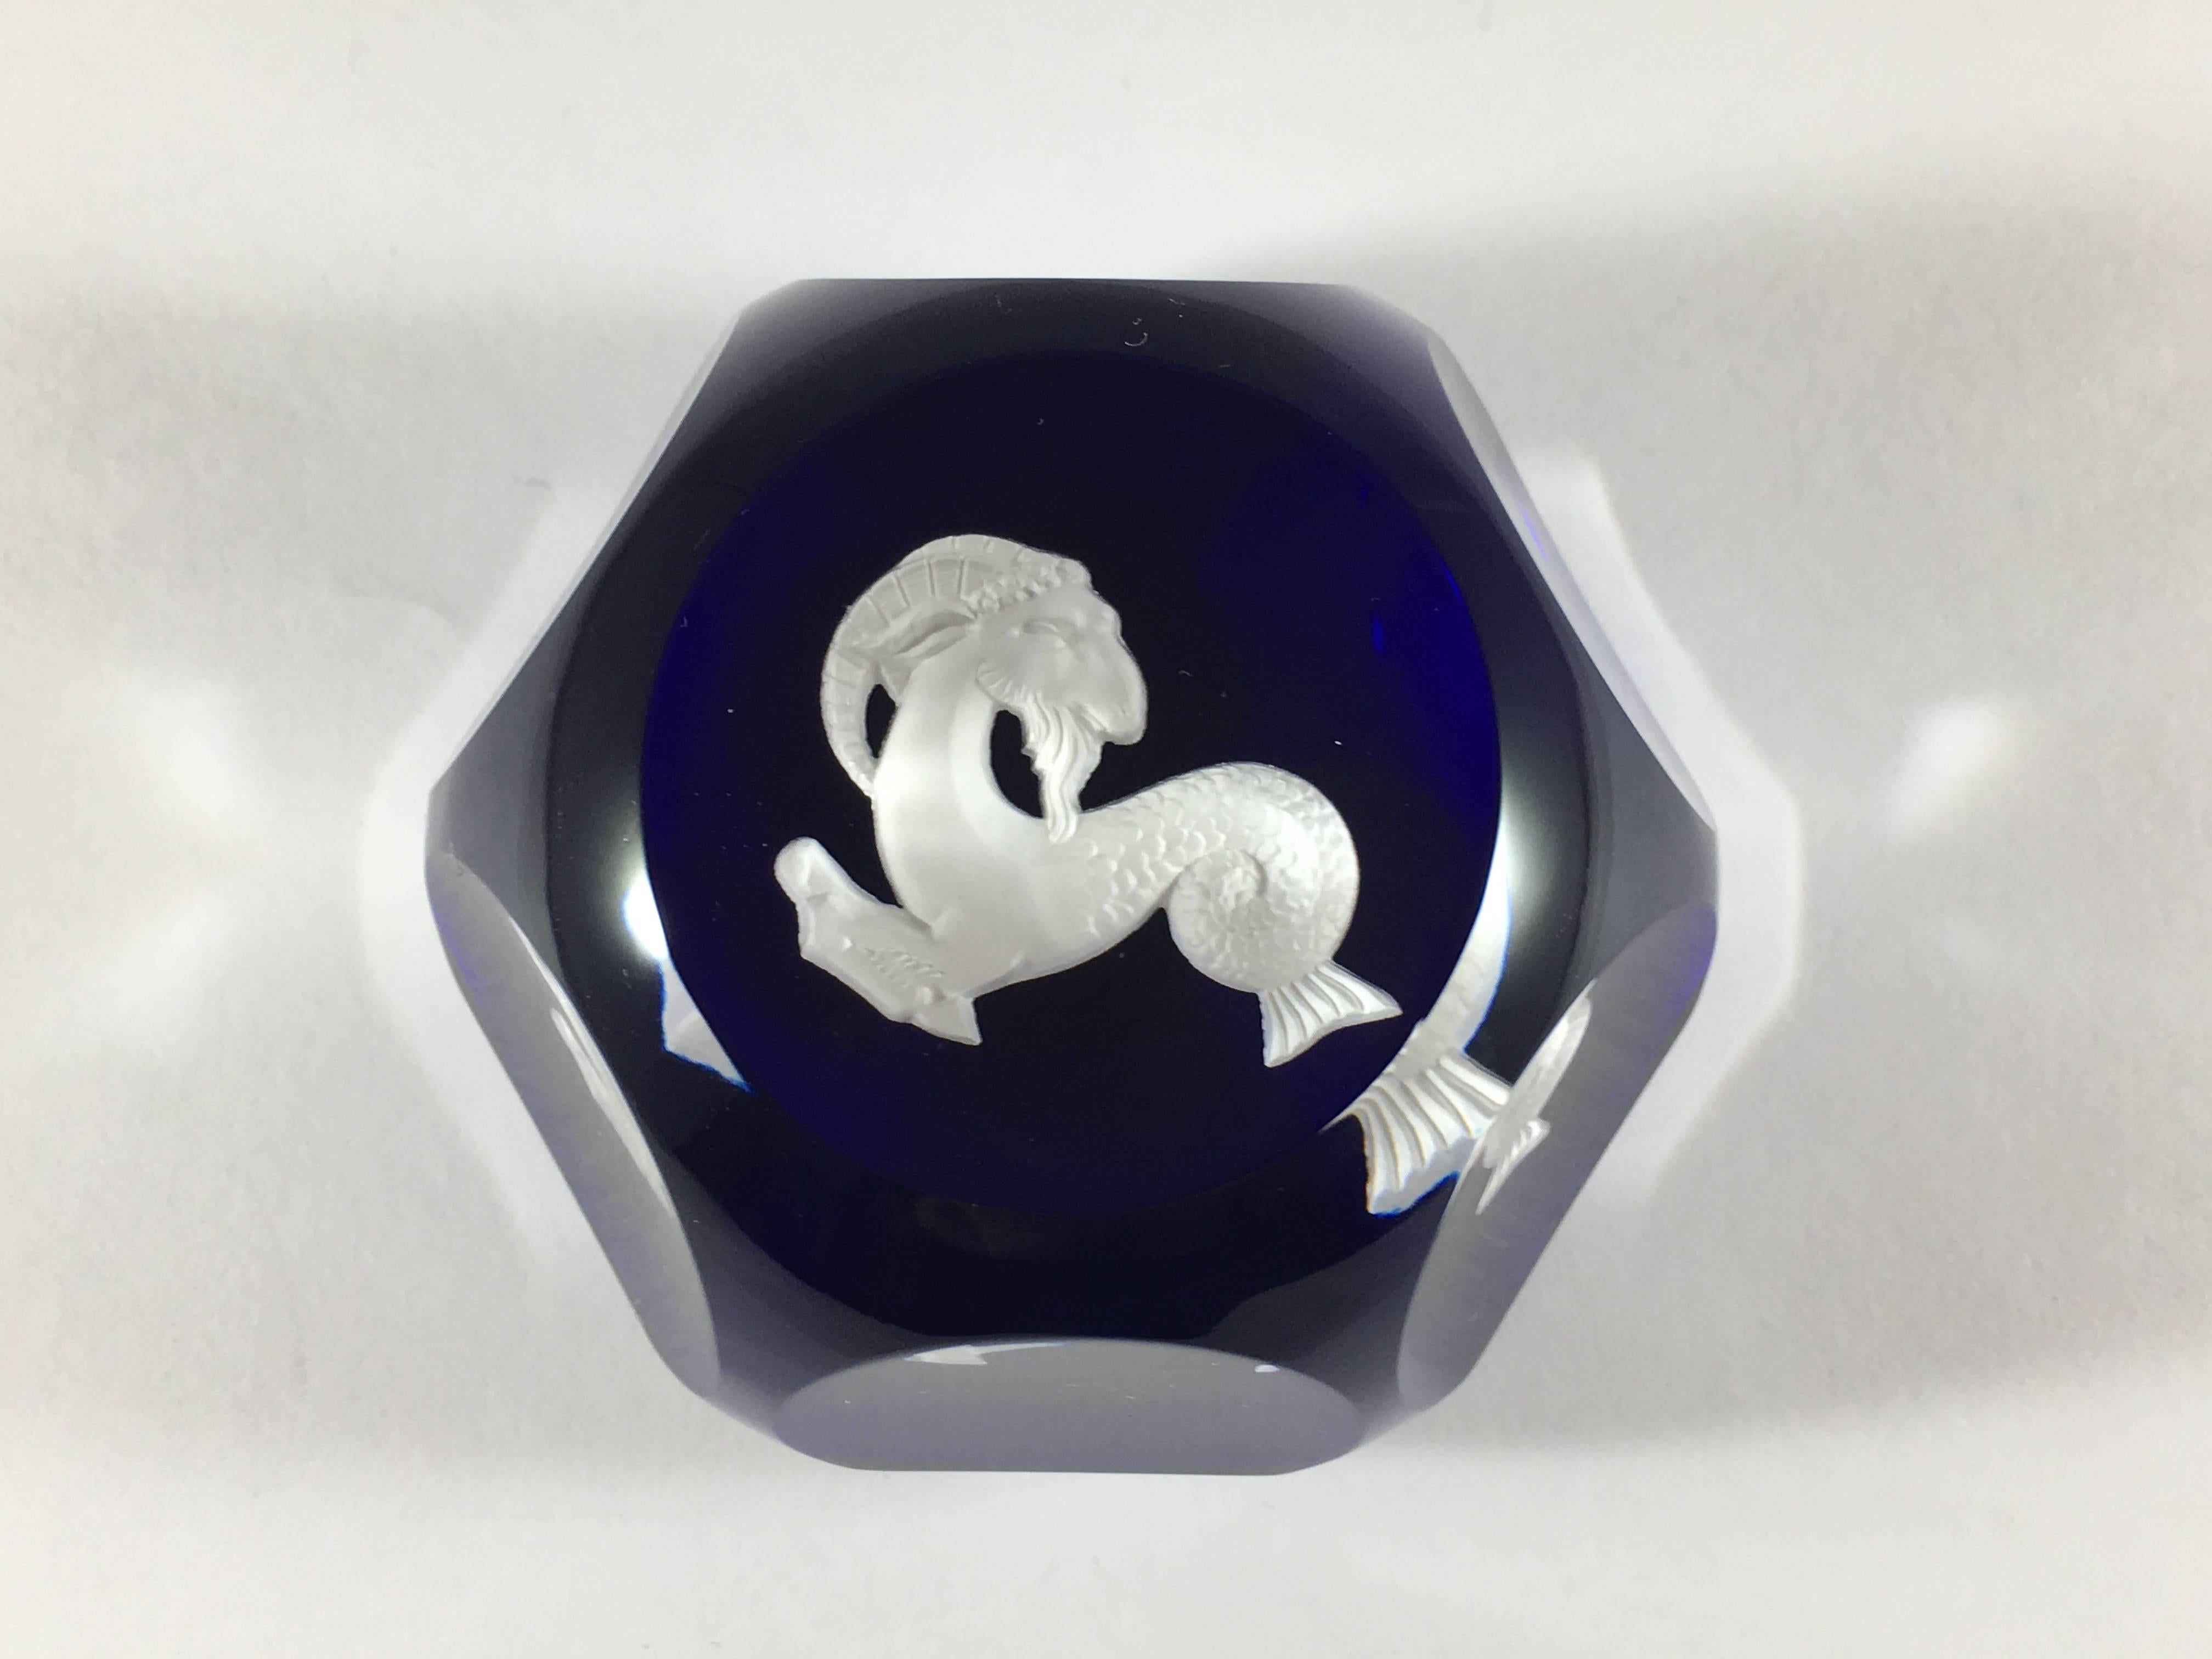 This is a 1970s cobalt blue and white sulphide Capricorn paperweight made by Baccarat. It has six faceted sides and measures 1 3/4 inches high and has a diameter of 2 1/2 inches. The bottom is etched with the Baccarat logo.  It is in excellent